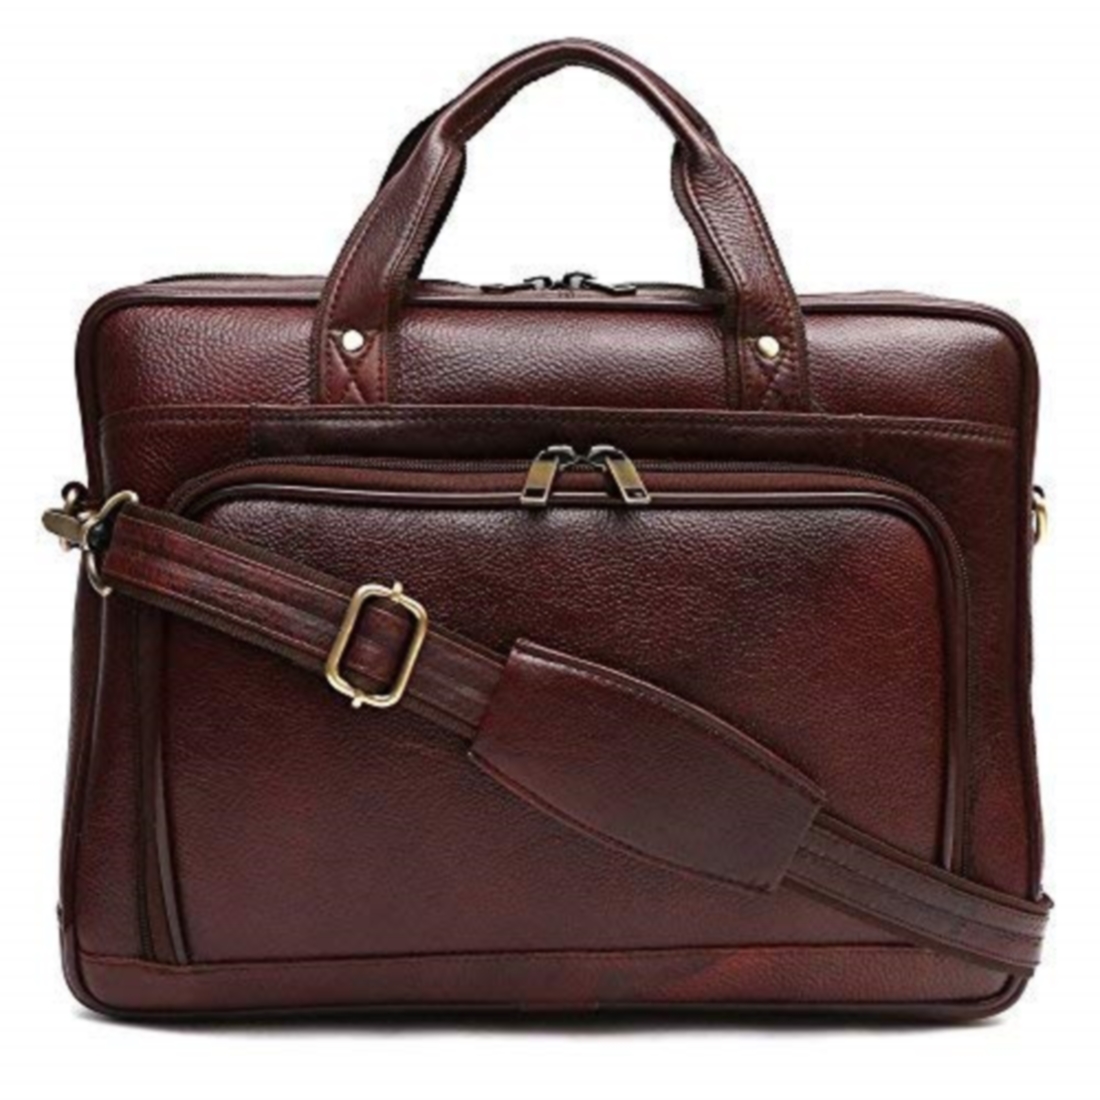 Pure Leather Laptop Bag Bulk Deal at B2B Marketplace for Leather Goods